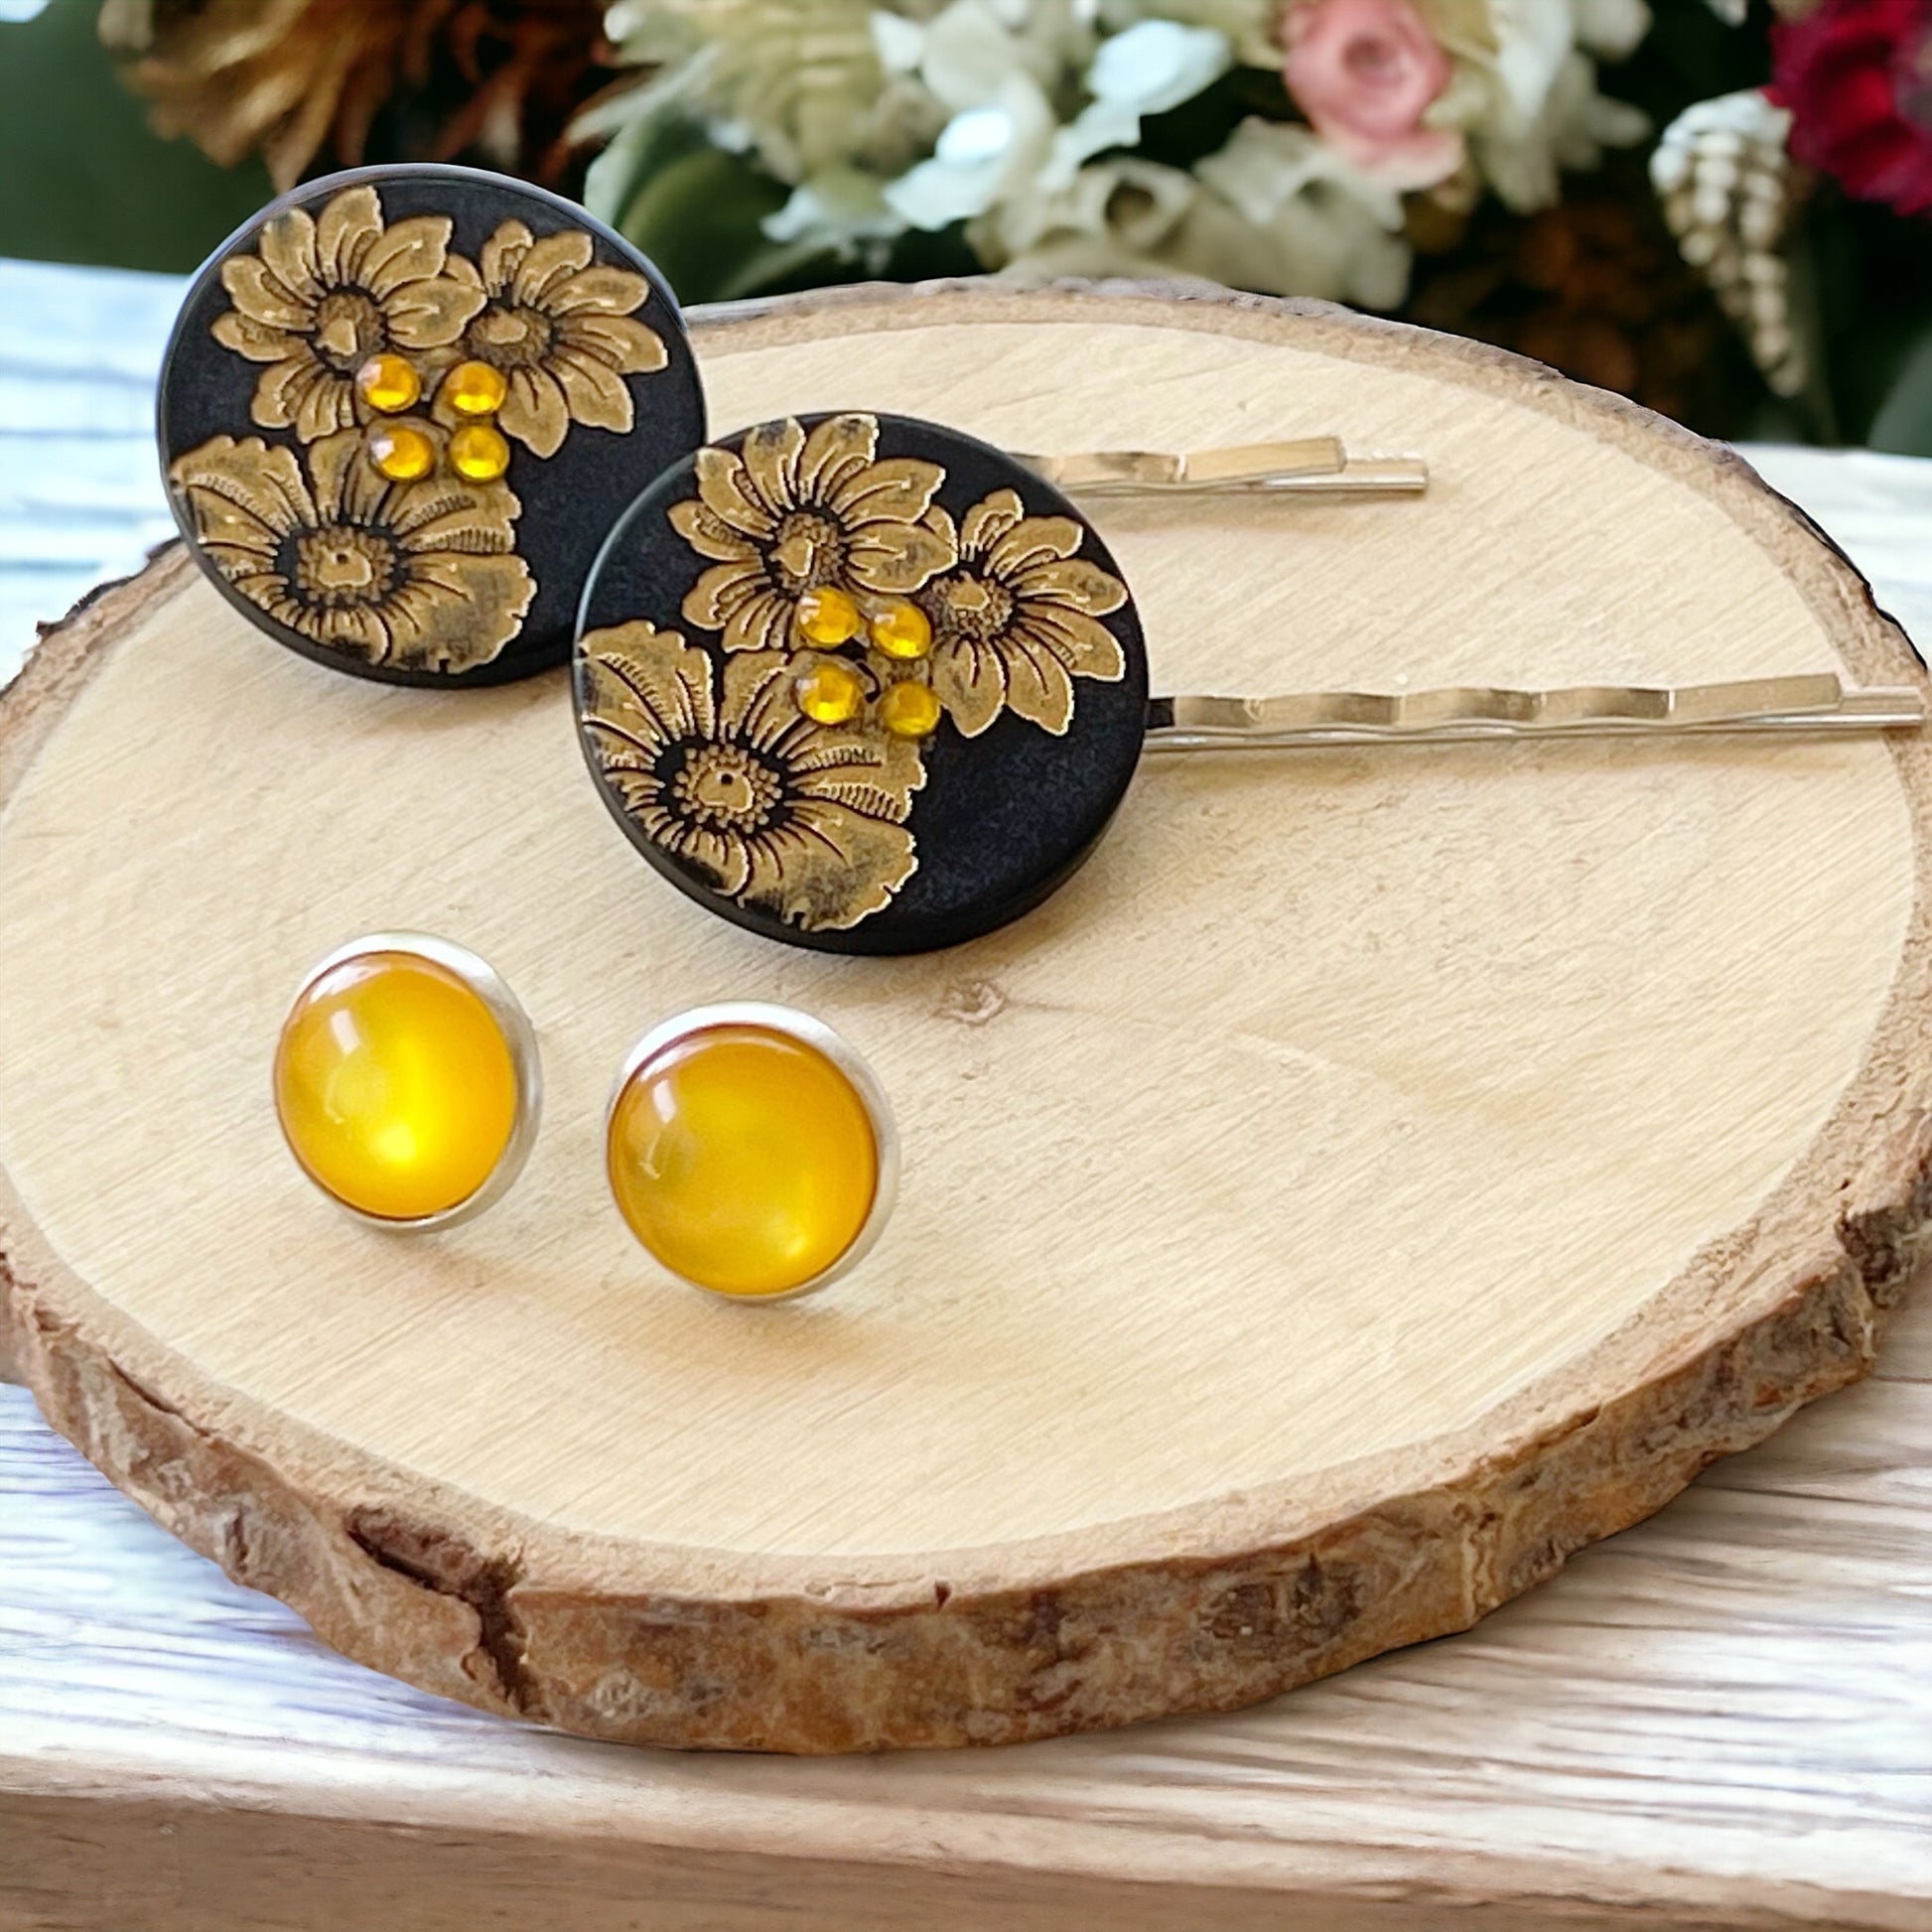 Black & Gold Sunflower Silver Bobby Pin Set with Matching 12mm Earrings - Stylish Floral Accessories